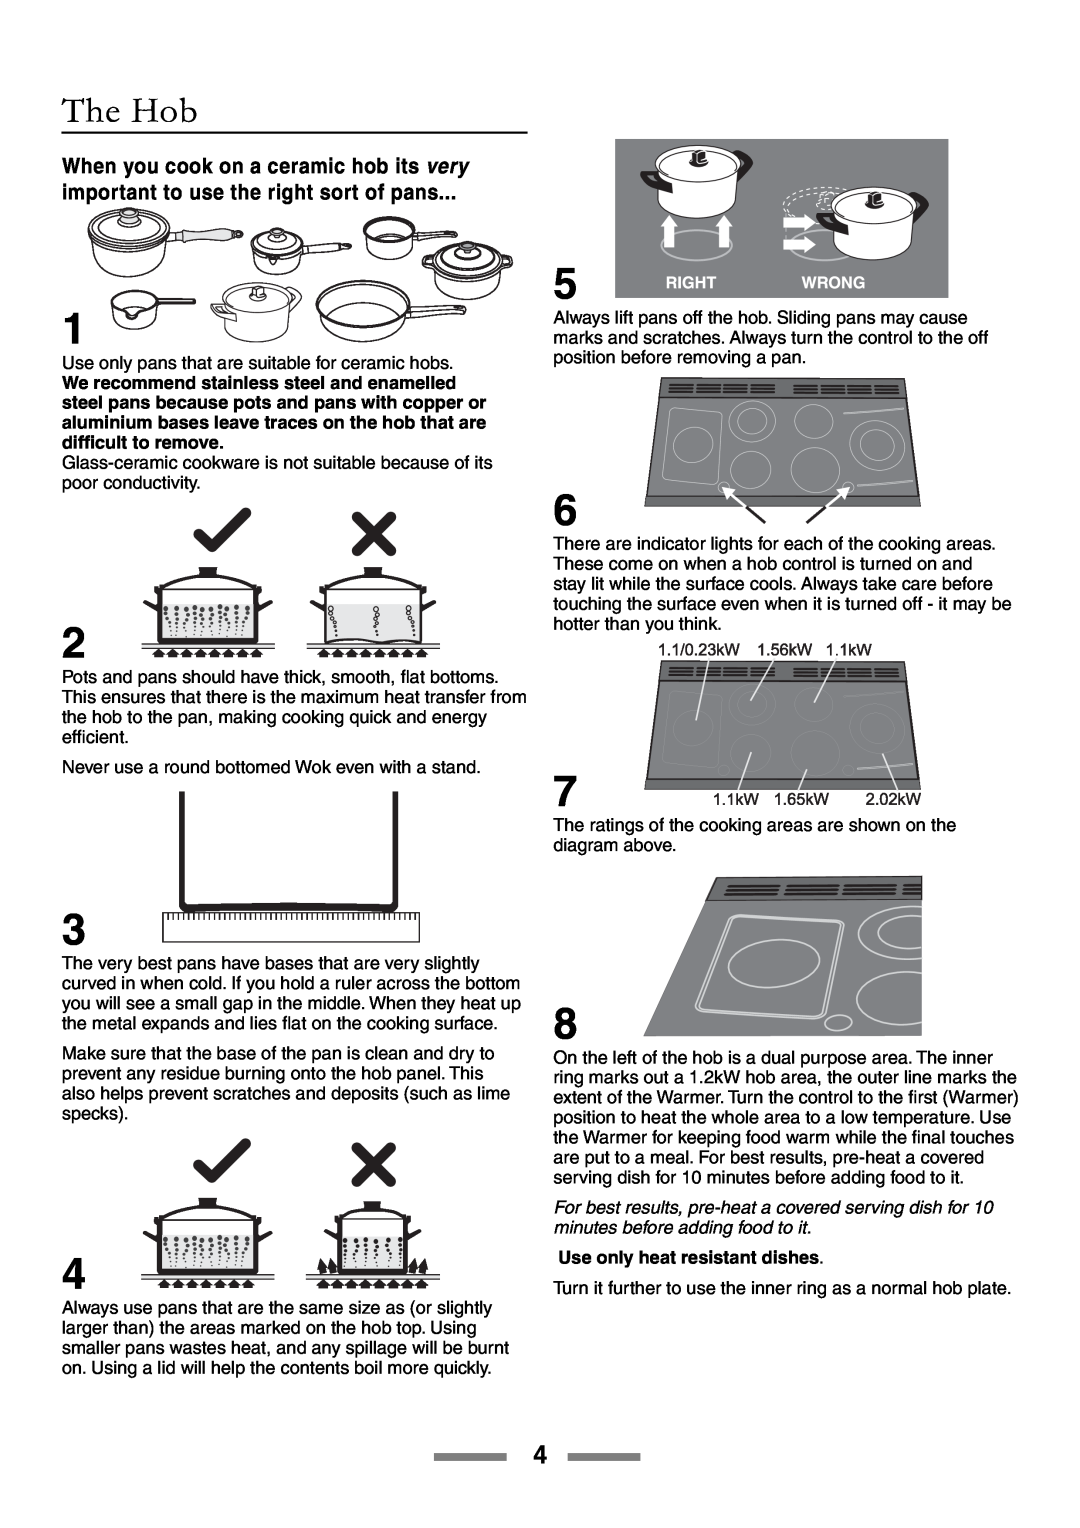 Rangemaster U105510-01 manual The Hob, When you cook on a ceramic hob its very, important to use the right sort of pans 